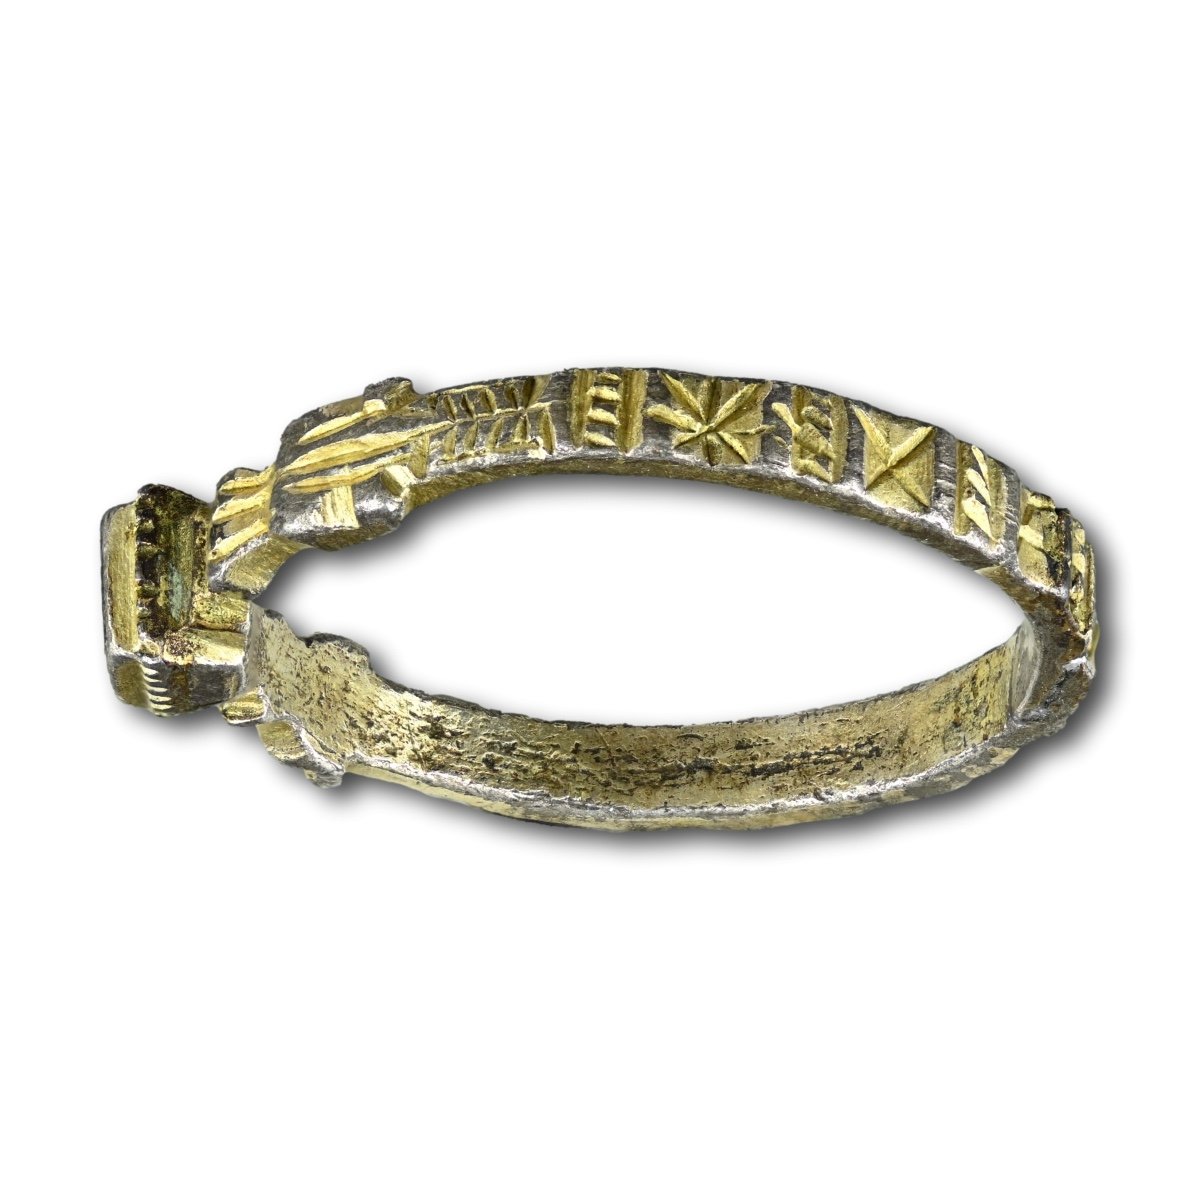 Medieval Silver Gilt And Niello Ring With Dragons. Italian, 13th / 14th Century.-photo-2